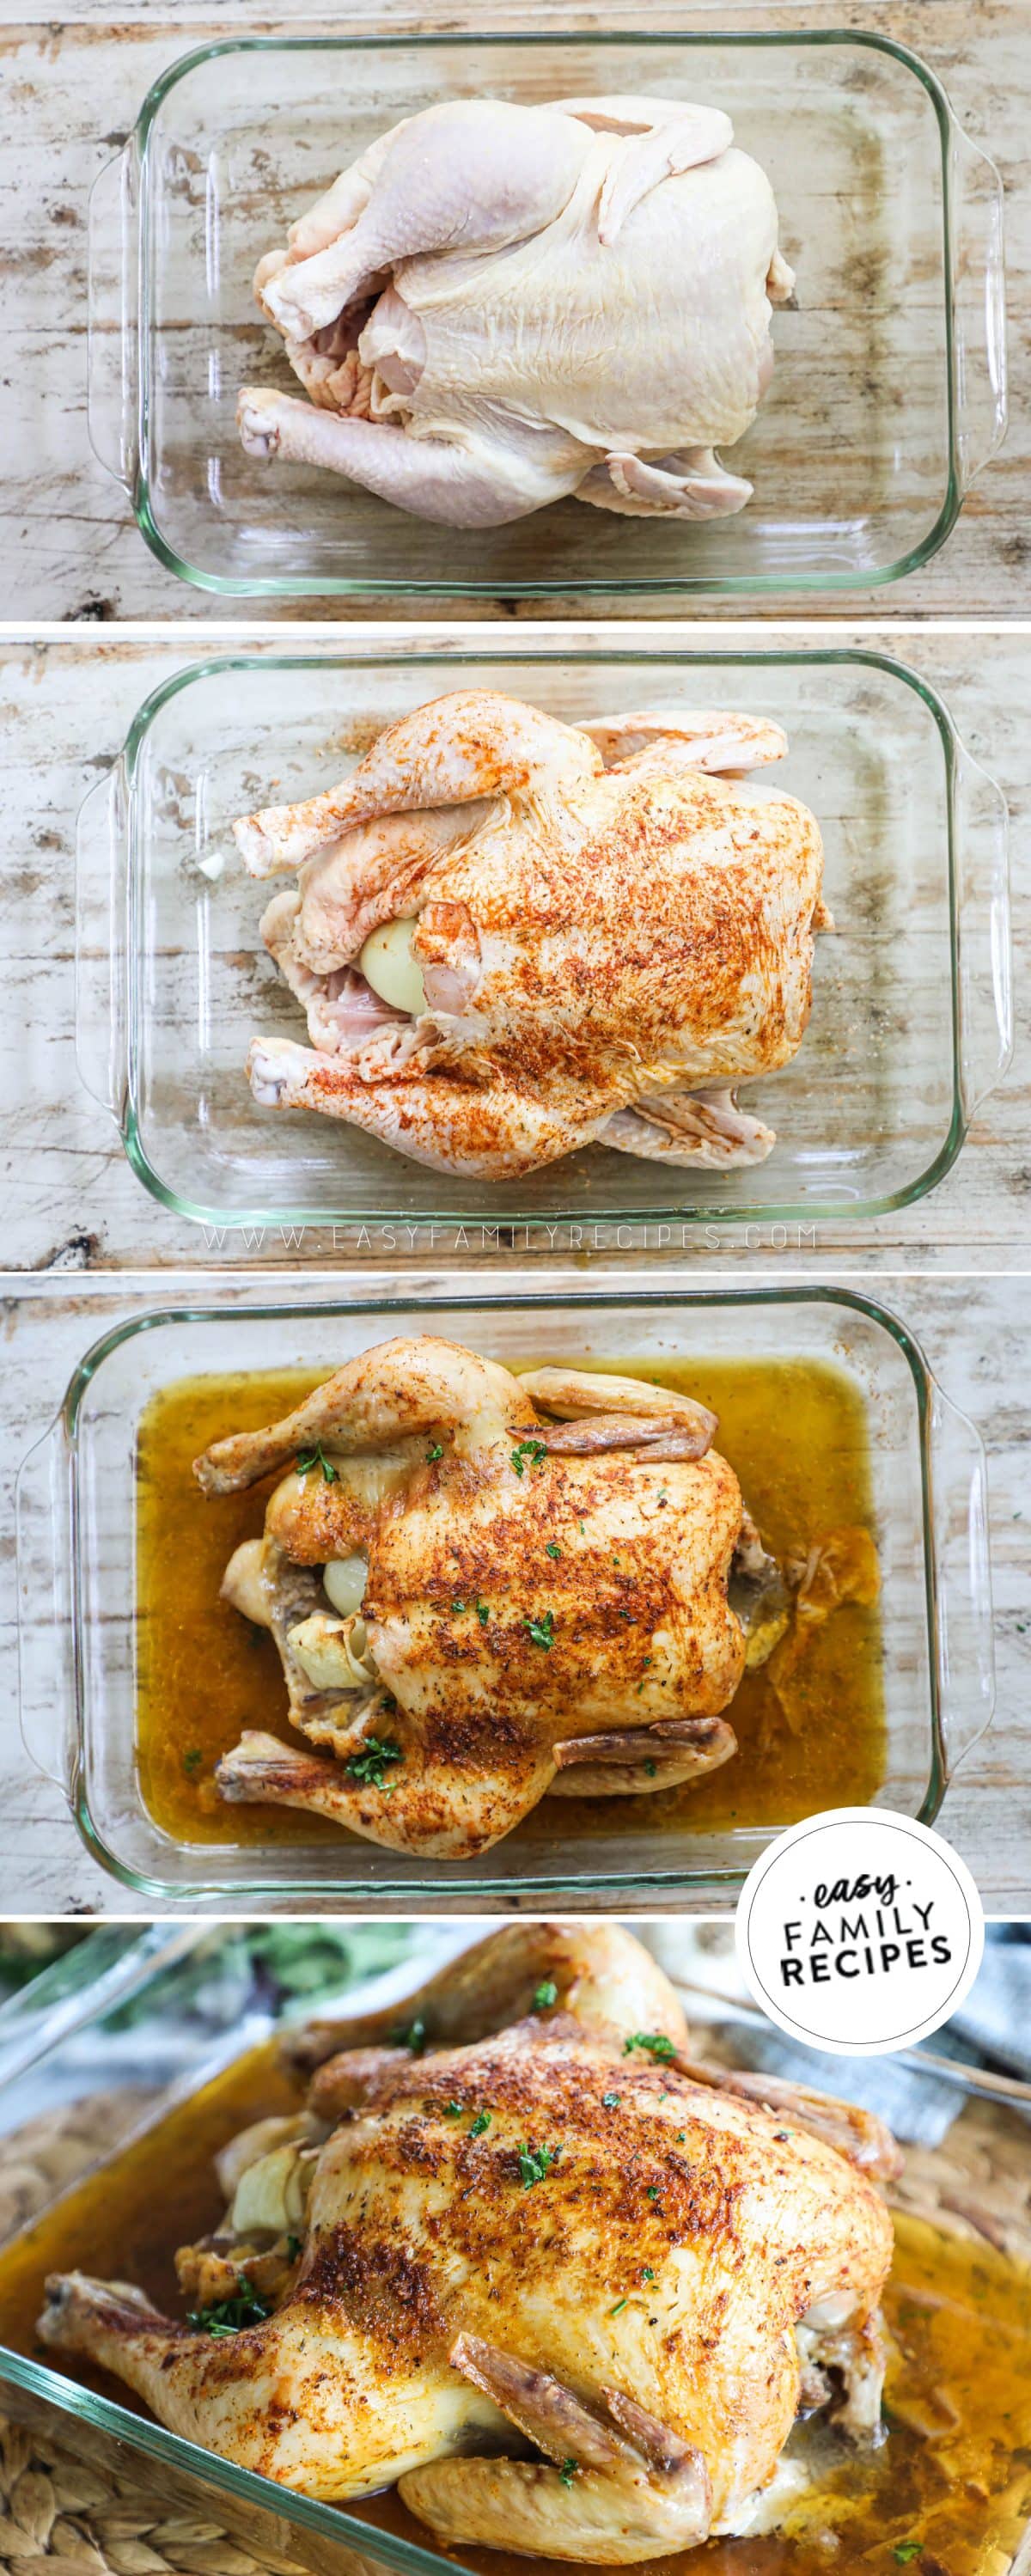 How to bake rotisserie style chicken in the oven 1)prepare chicken 2)rub with seasonings 3)roast in oven 4)serve.